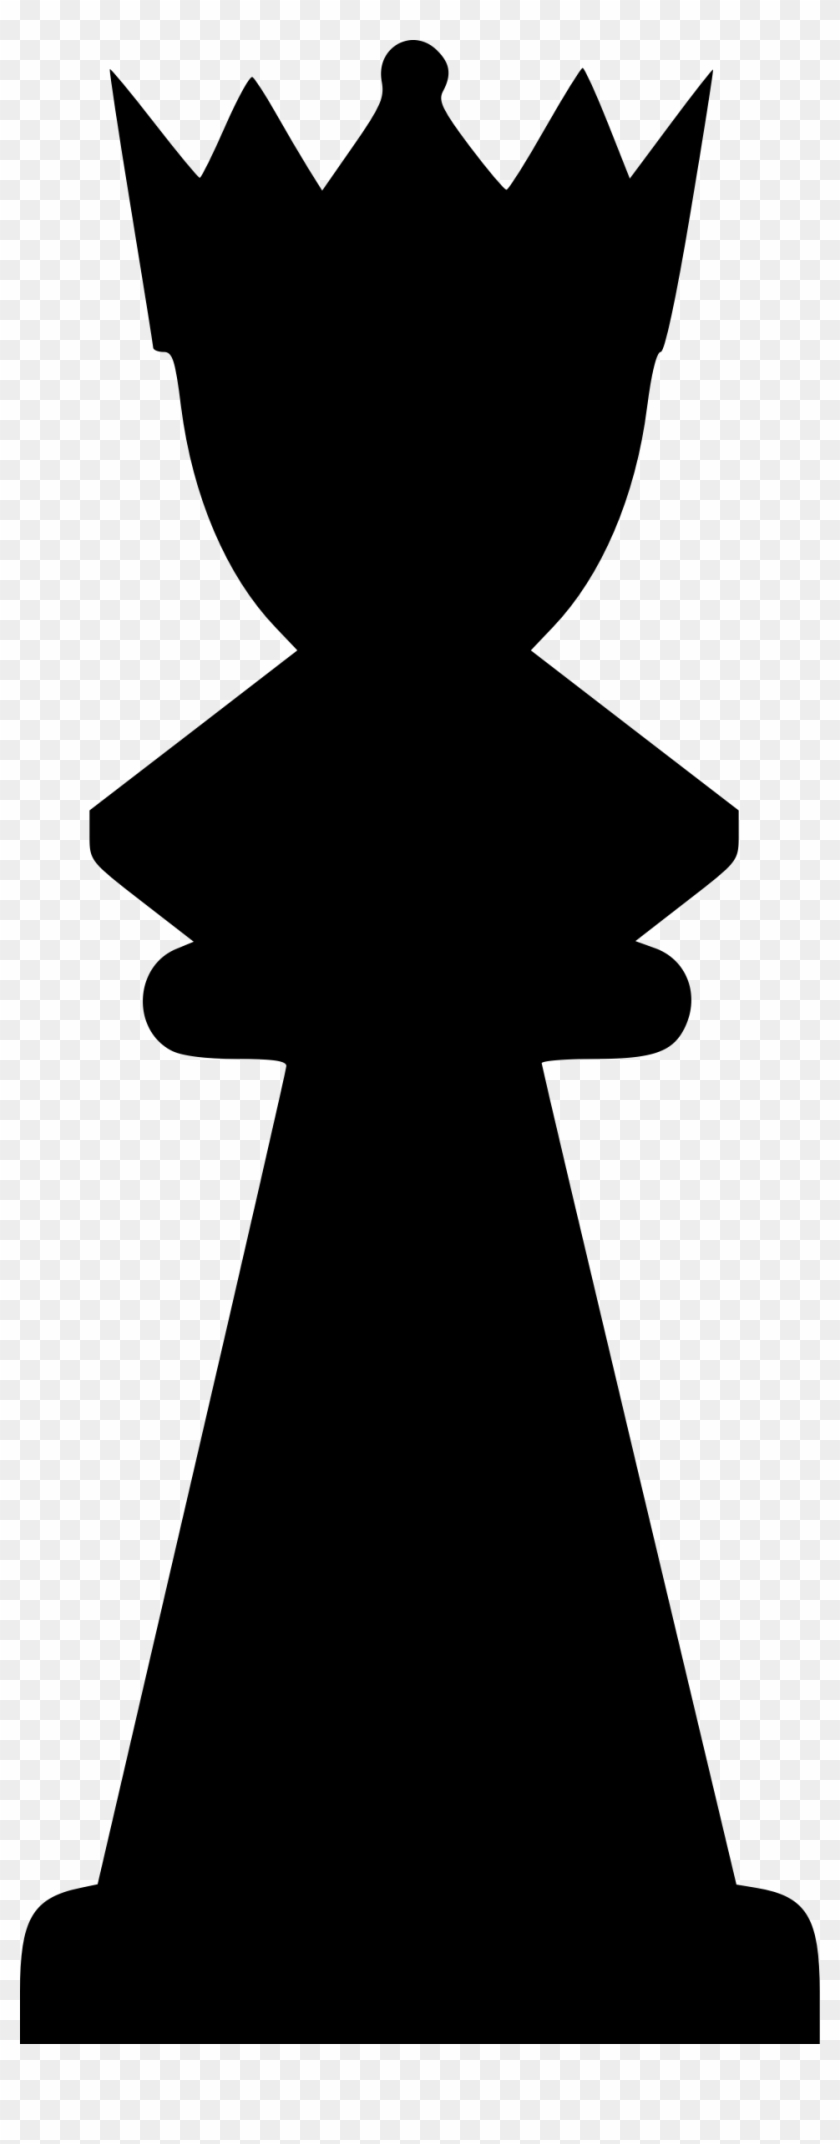 Clip Arts Related To - Queen Chess Piece Vector #527664